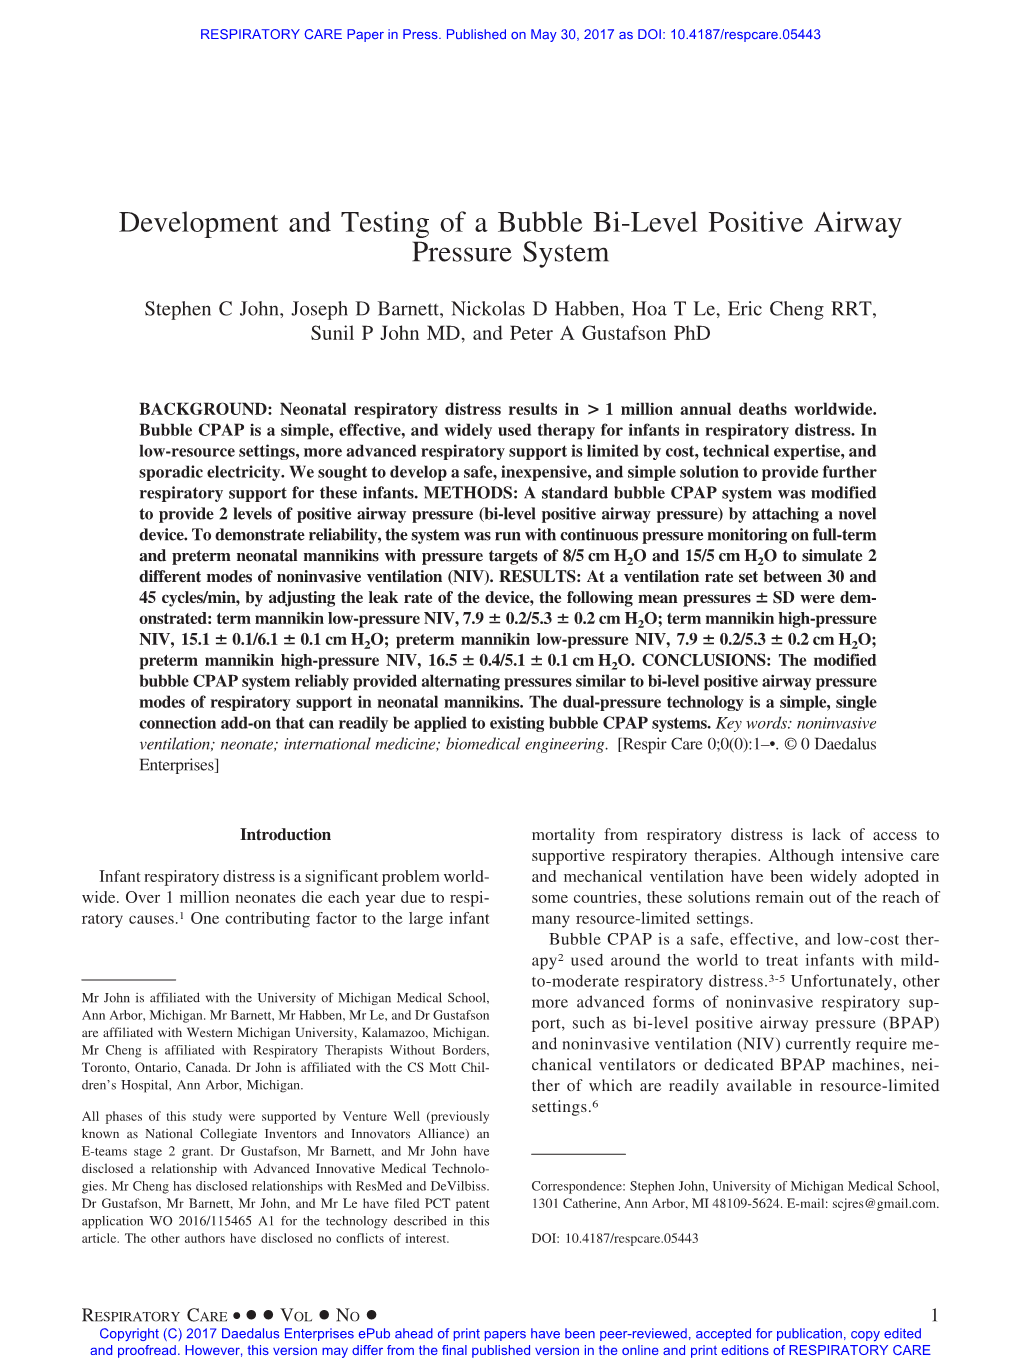 Development and Testing of a Bubble Bi-Level Positive Airway Pressure System